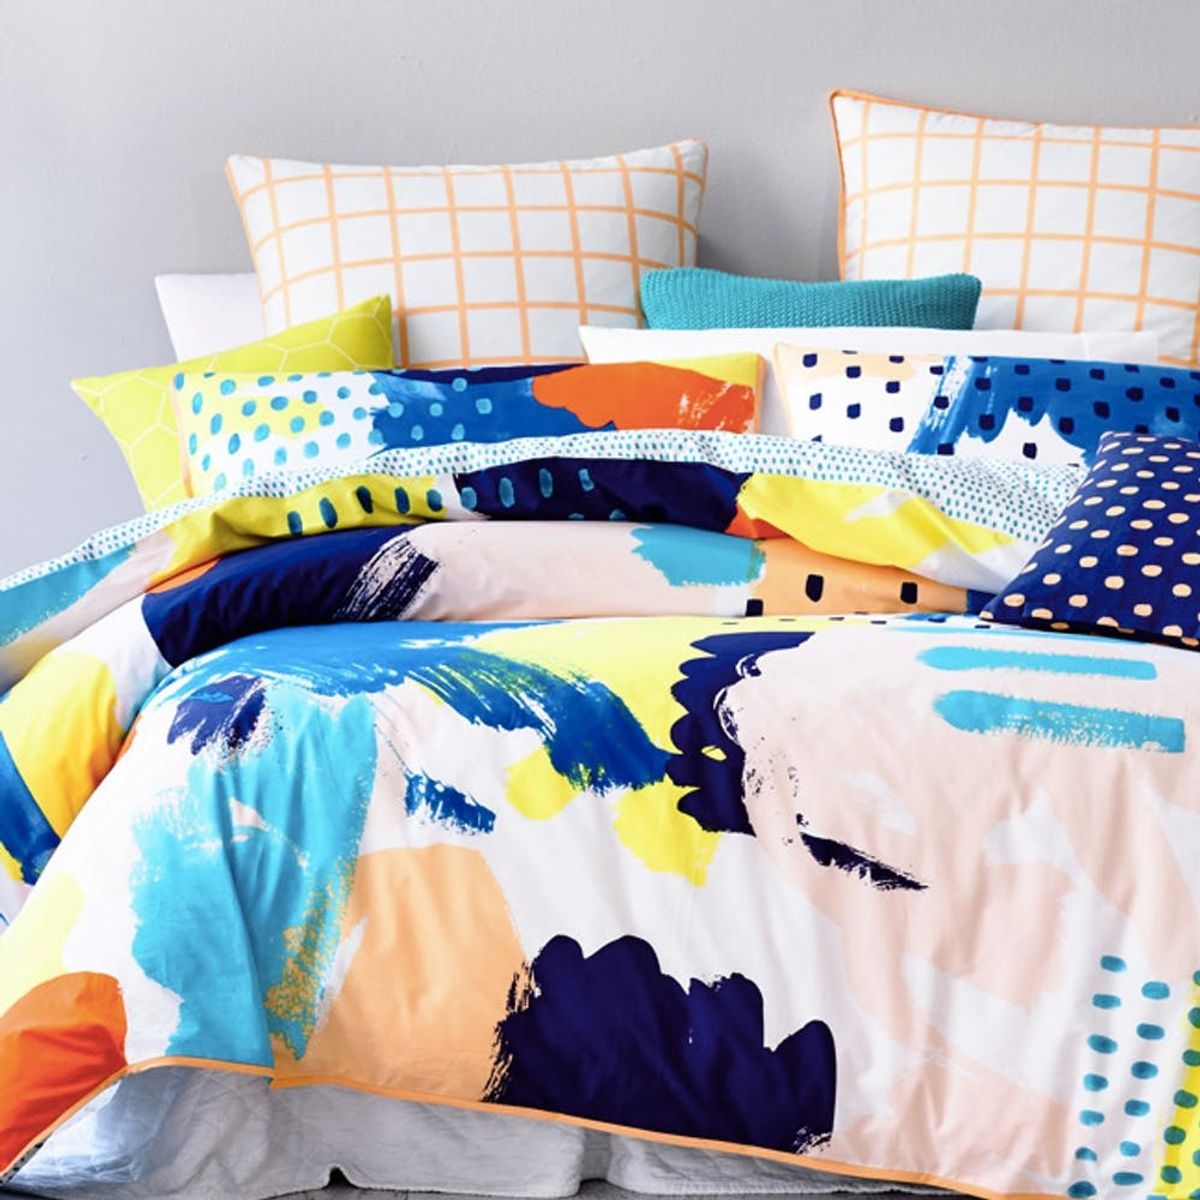 14 Modern Bedding Picks for a Chic Small Space